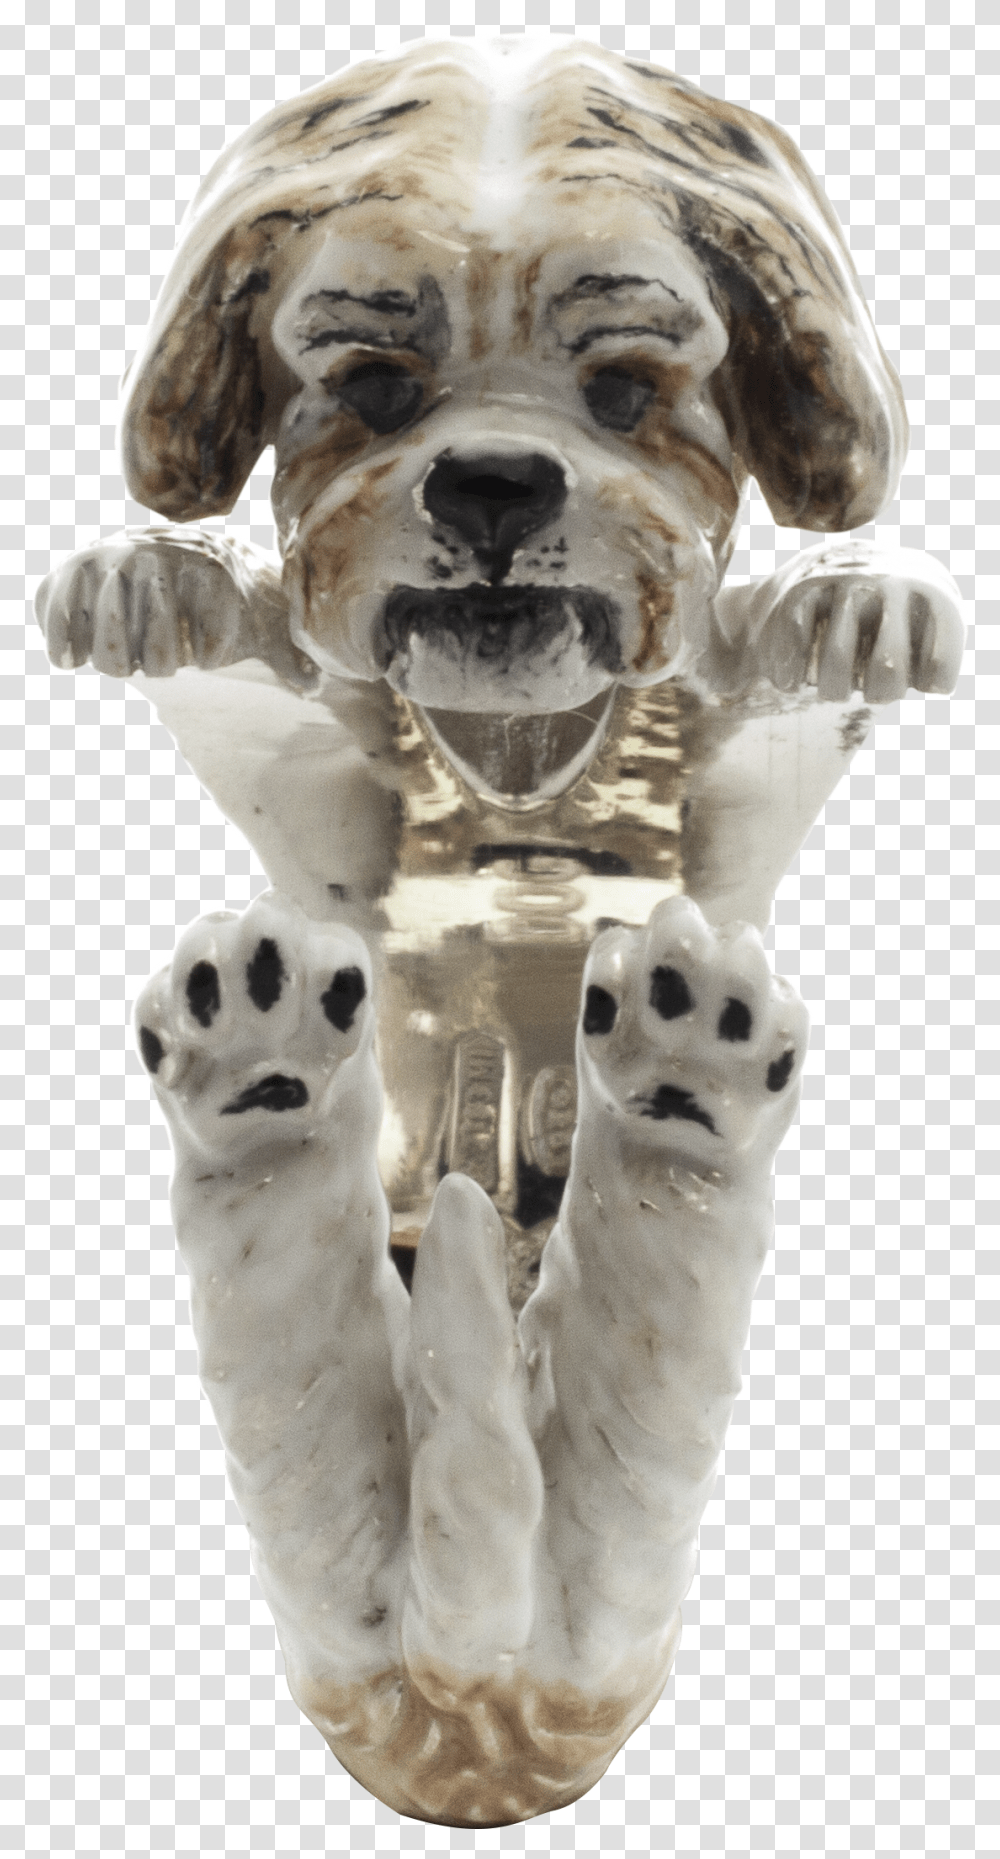 Dog Catches Something, Pet, Canine, Animal, Mammal Transparent Png